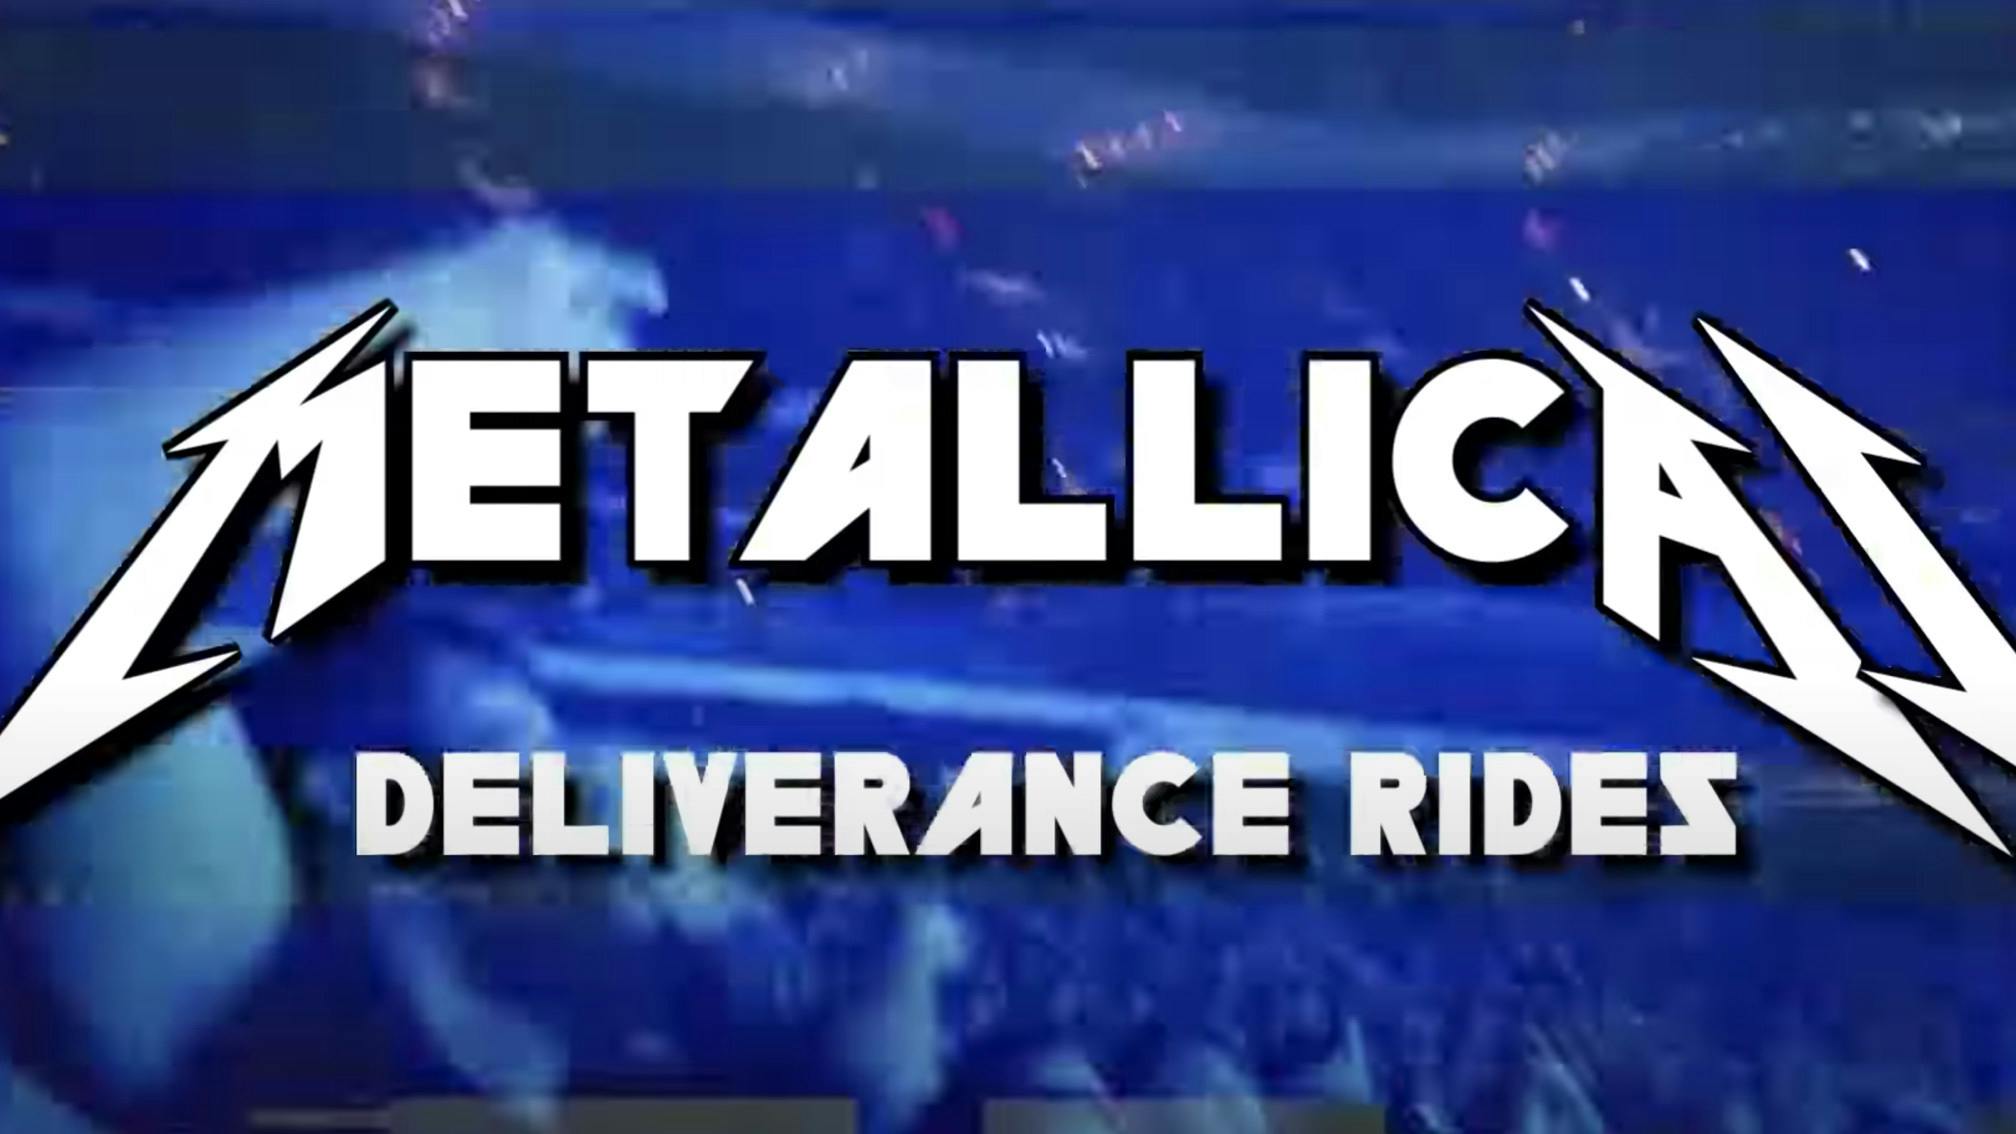 Listen To A Fake Metallica Song Created Using Artificial Intelligence